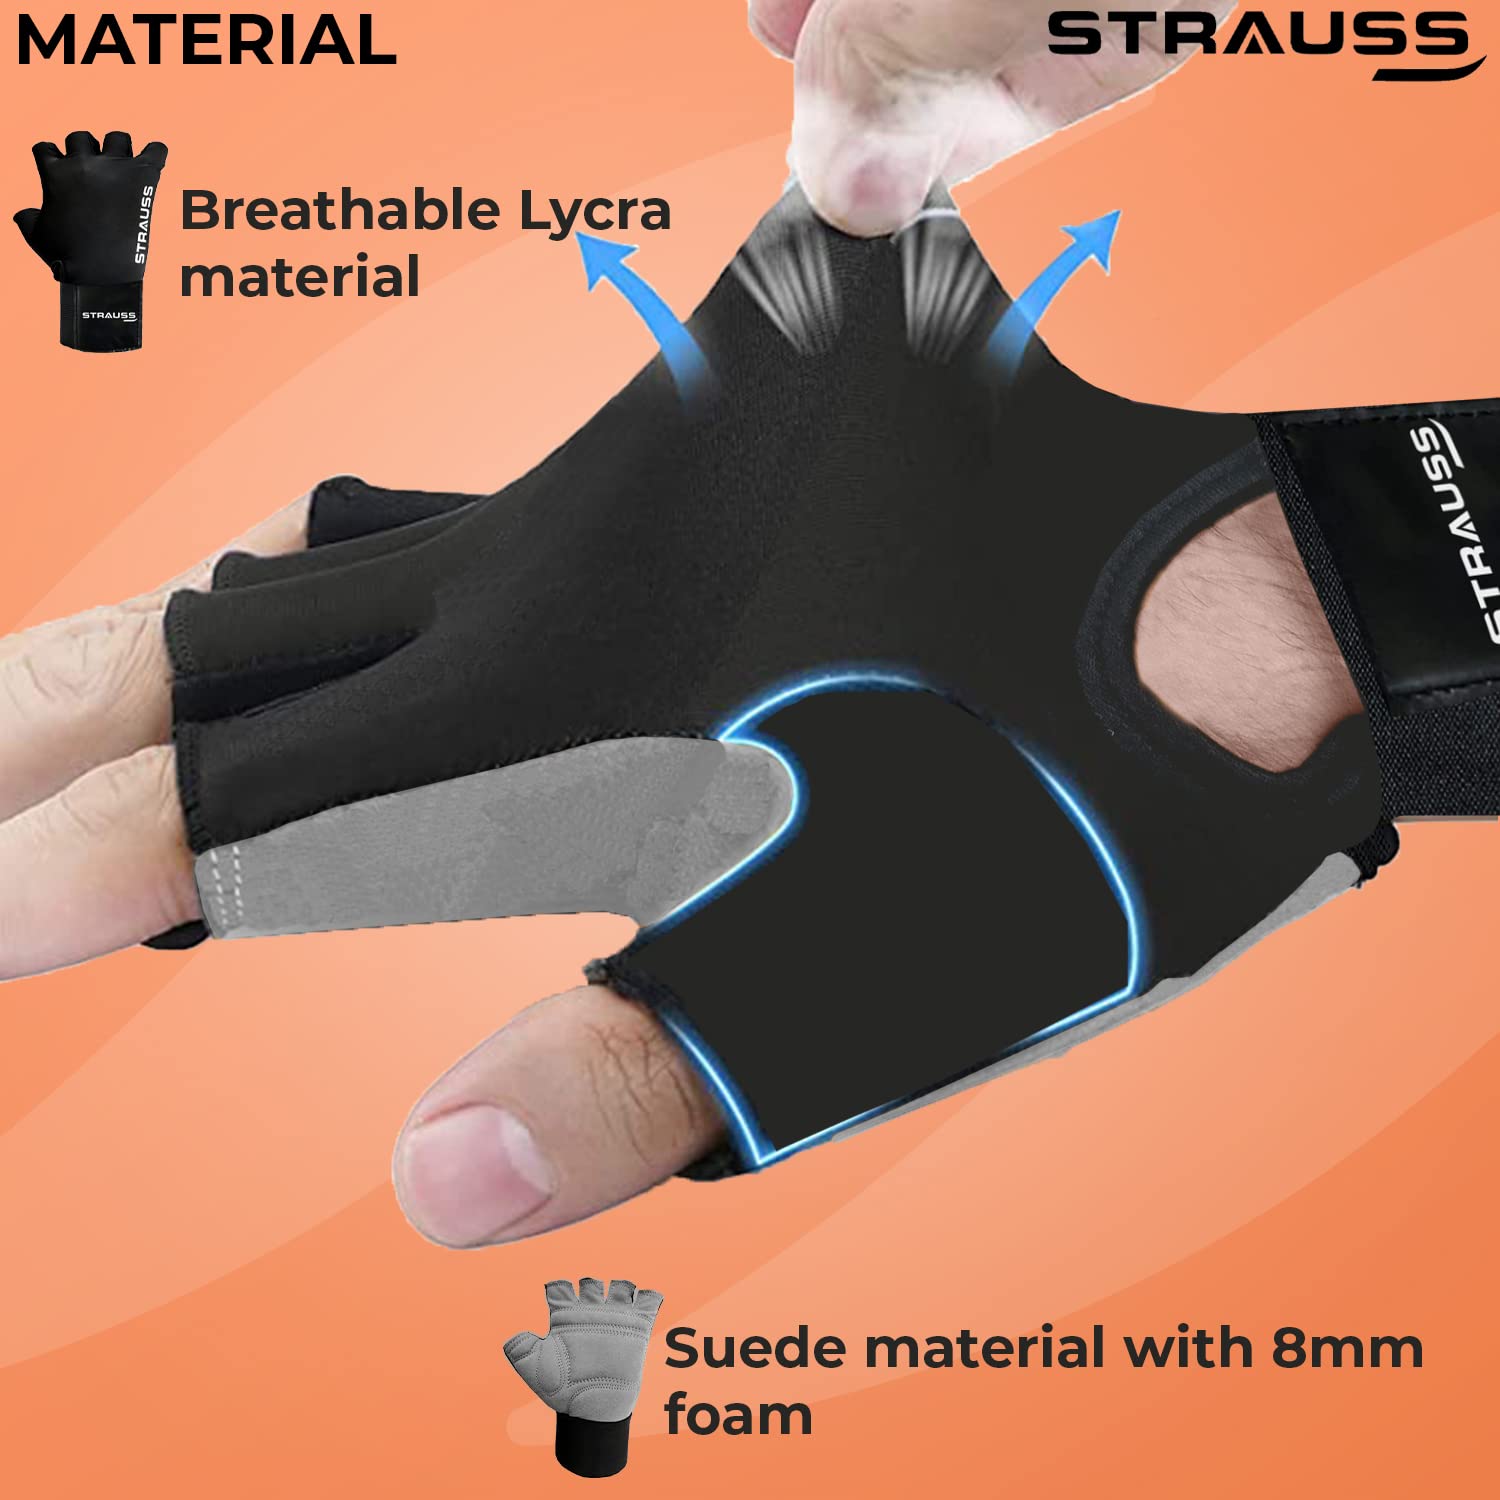 STRAUSS Suede Gym Gloves for Weightlifting, Training, Cycling, Exercise & Gym | Half Finger Design, 8mm Foam Cushioning, Anti-Slip & Breathable Lycra Material, (Grey/Black), (Small)